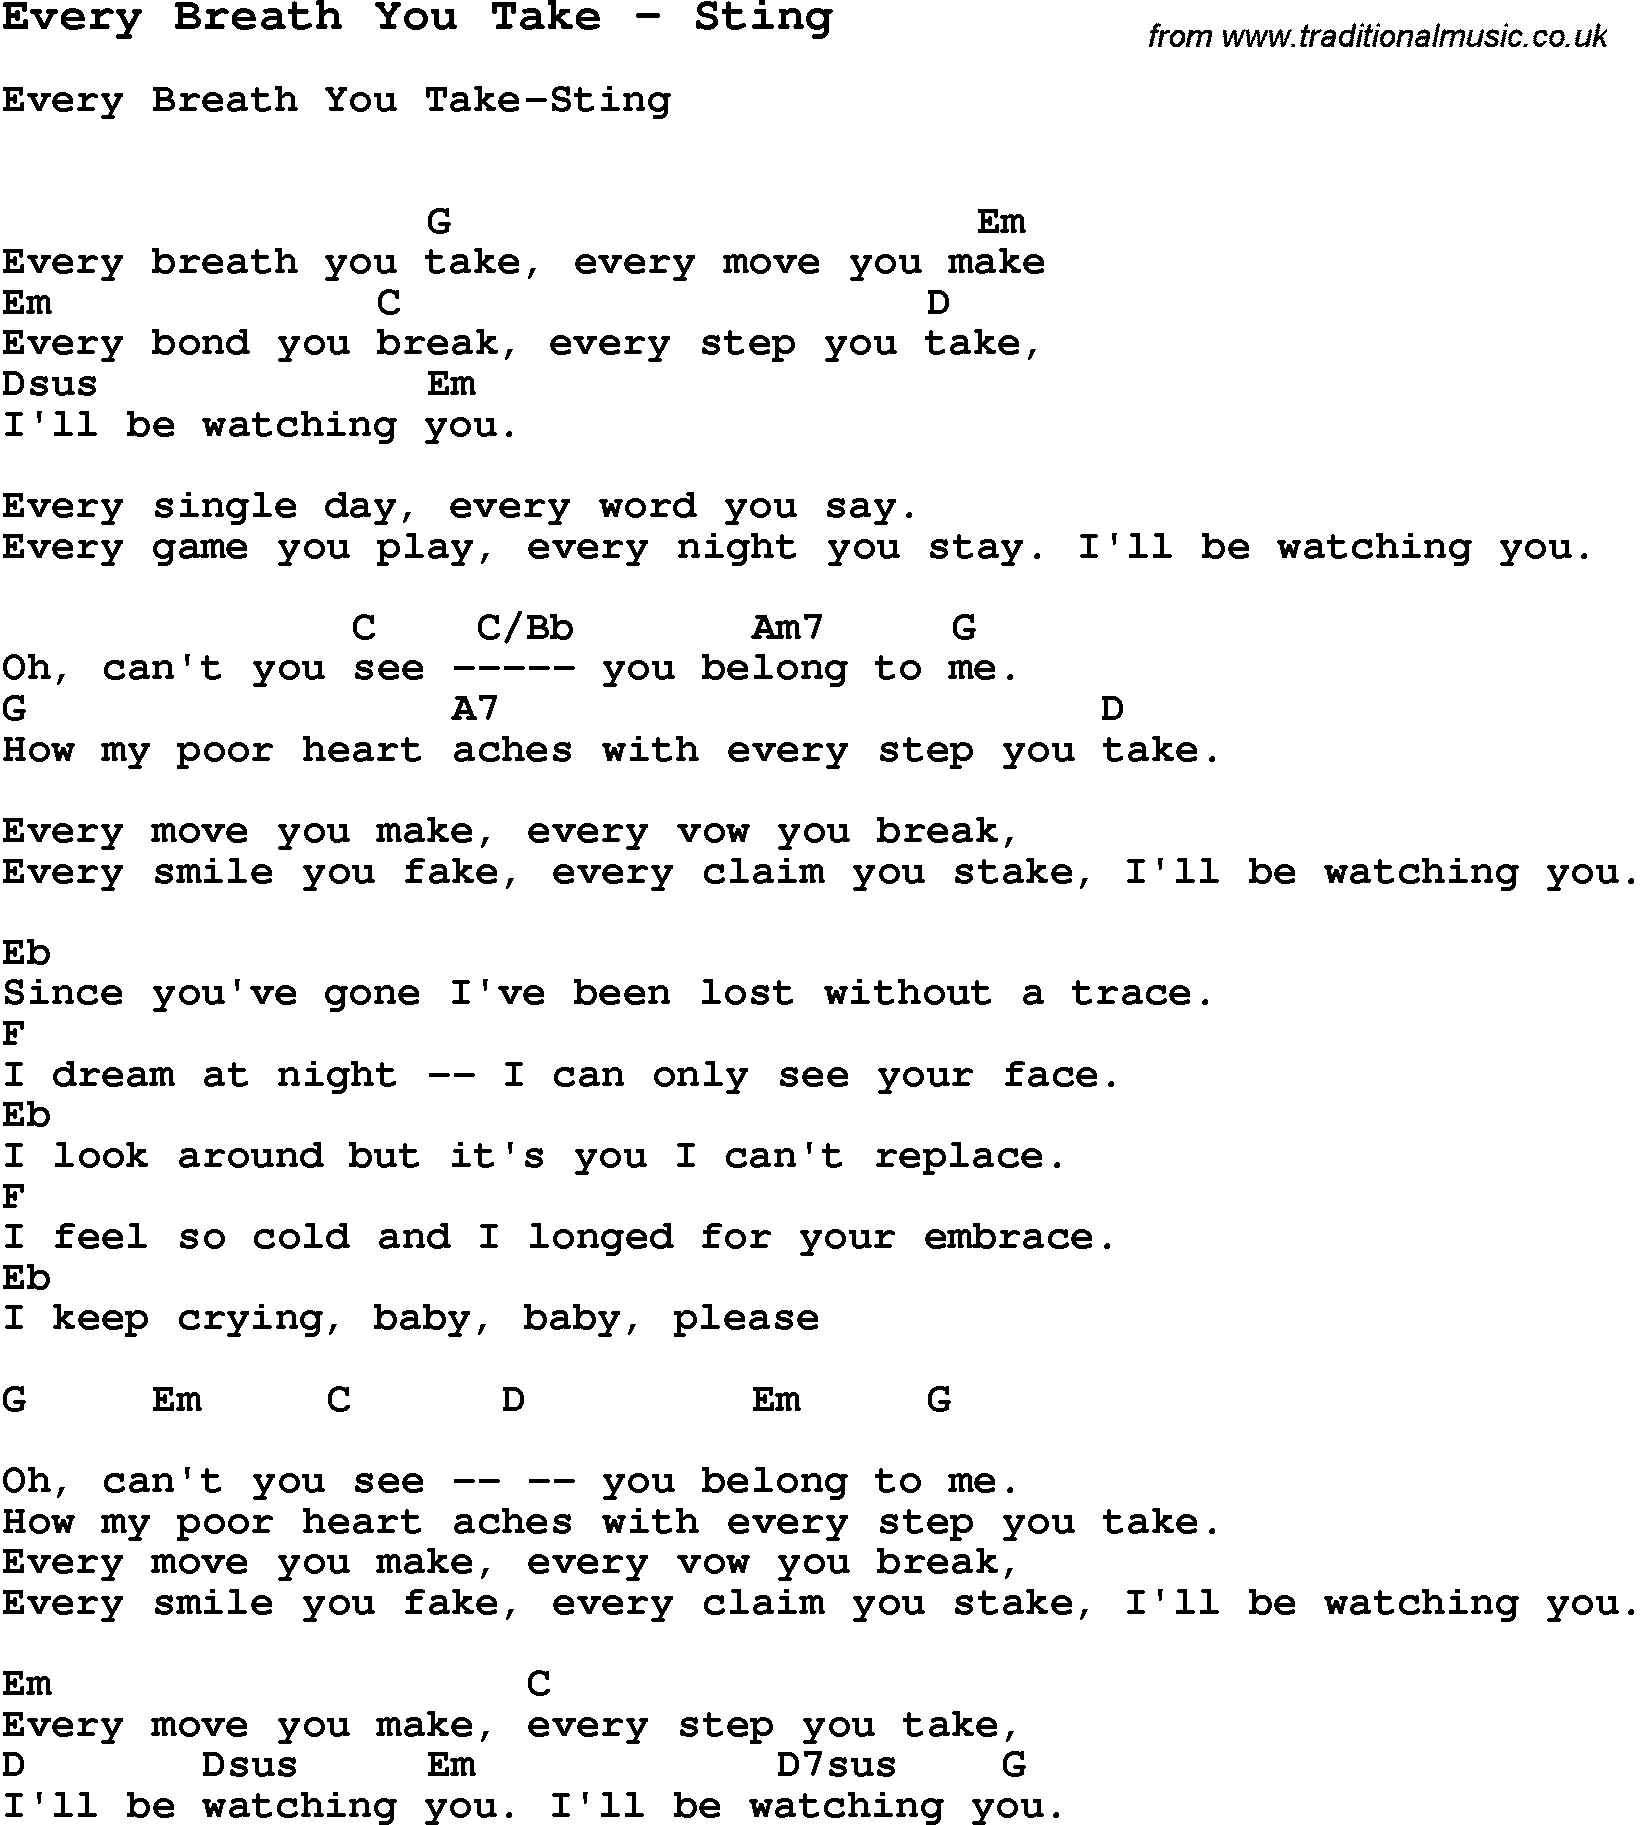 Song Every Breath You Take by Sting, with lyrics for vocal performance and accompaniment chords for Ukulele, Guitar Banjo etc.